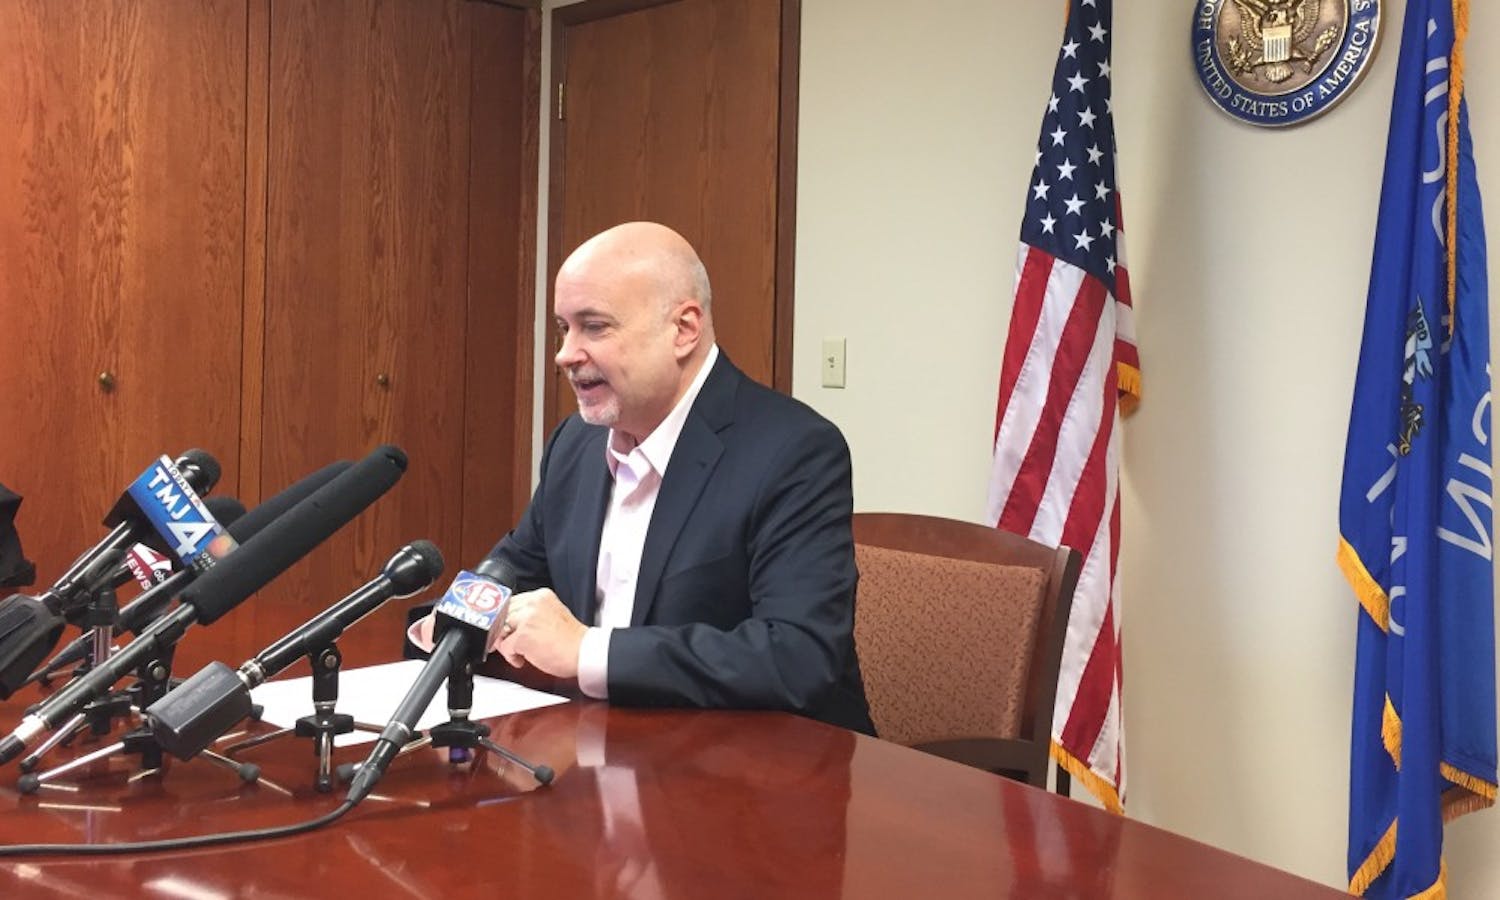 U.S. Rep. Mark Pocan, D-Wis., announced he will not be attending President-elect Donald Trump’s inauguration and that he would be attending the Women’s March in Madison the following day.